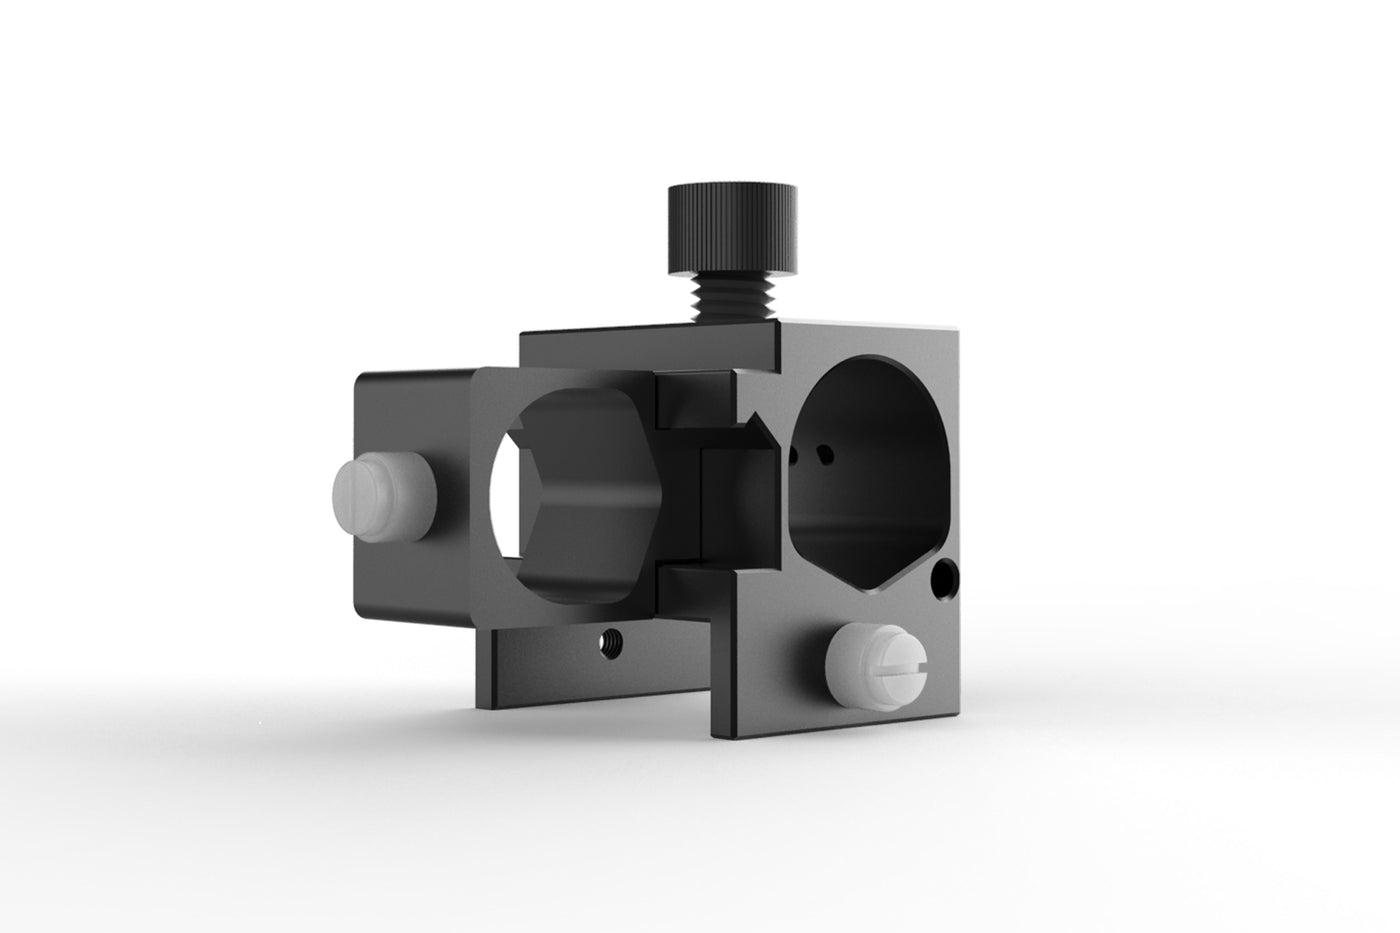 Universal Mount For Polar Scope and Pointer